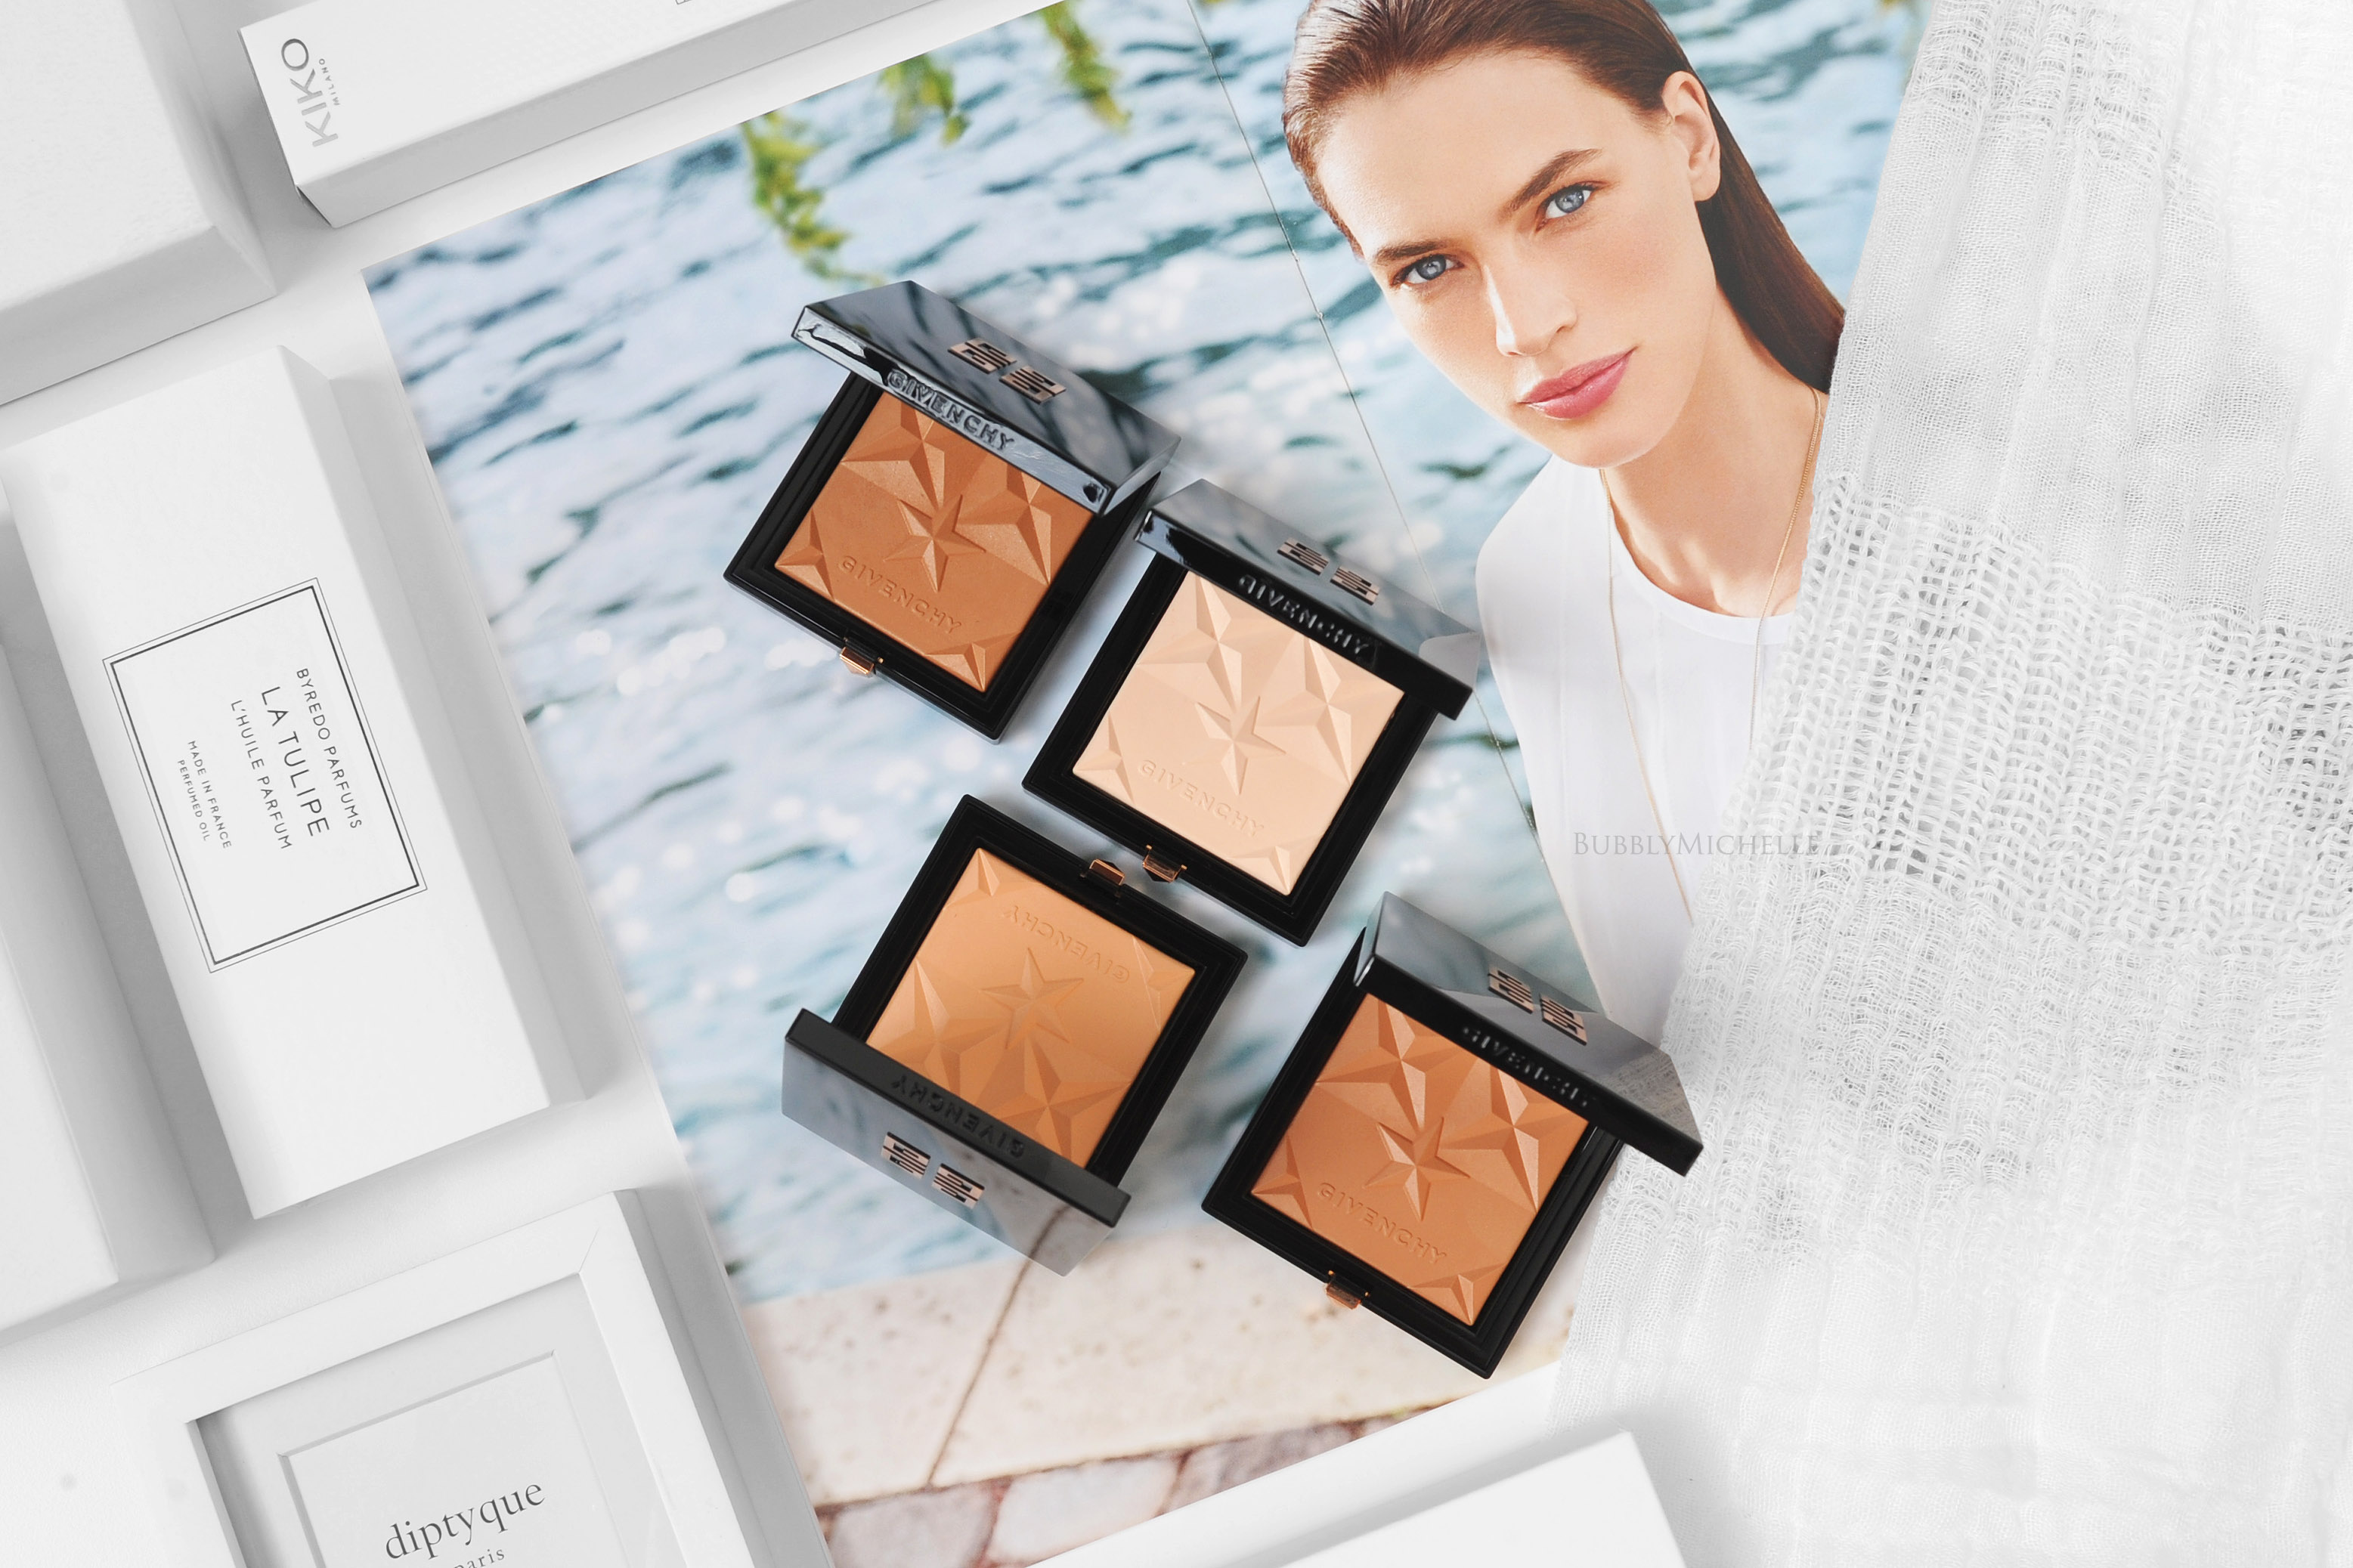 givenchy bronzer